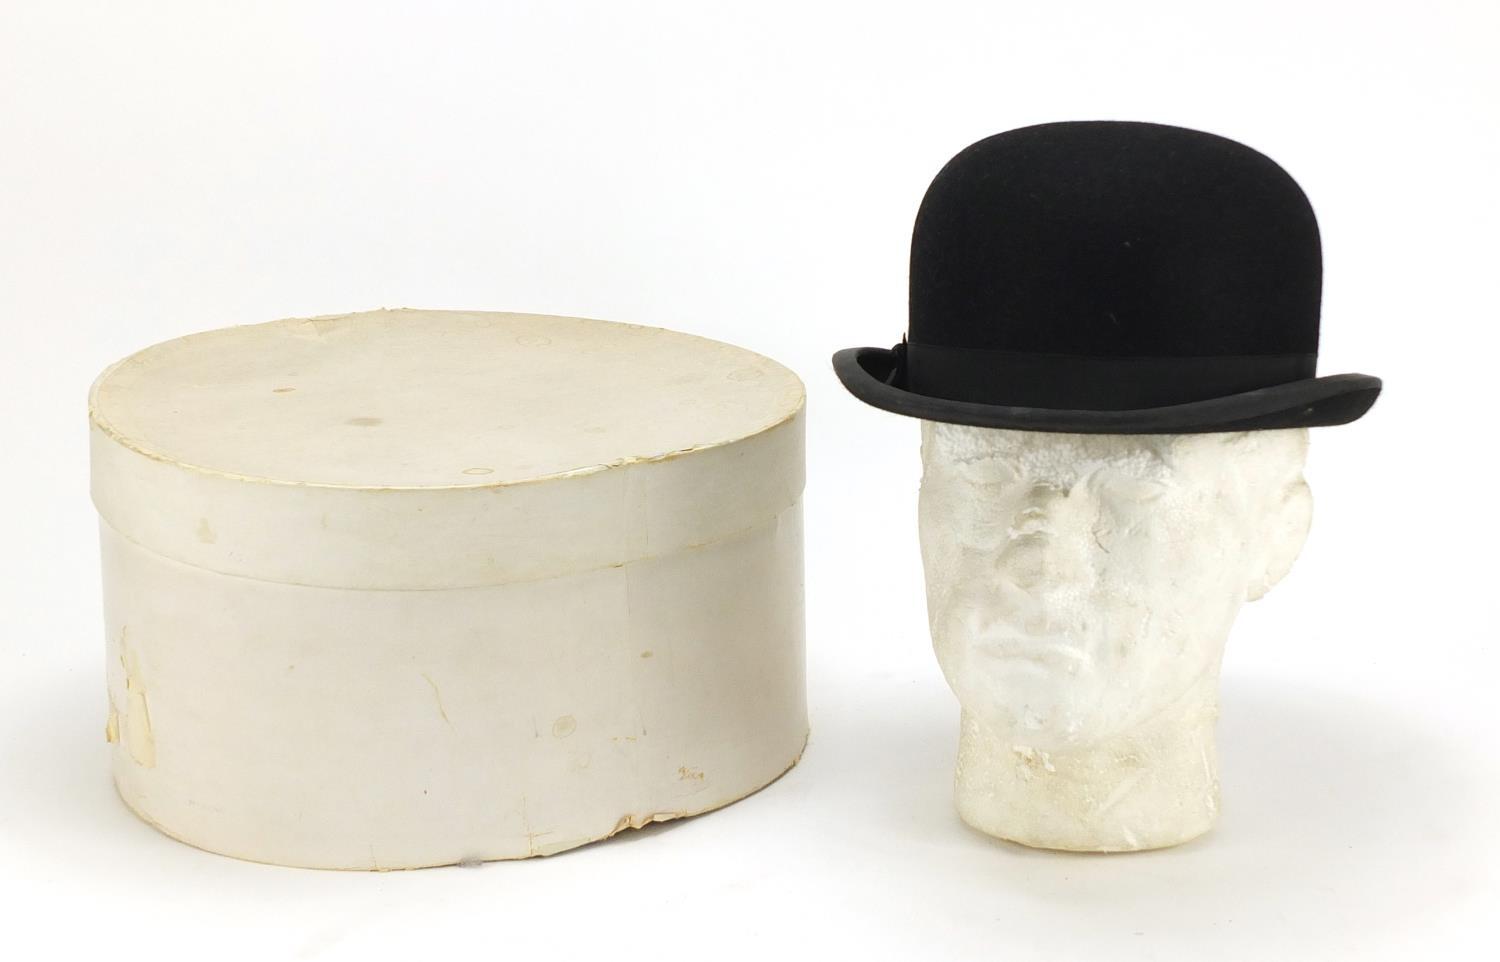 Gentleman's bowler hat retailed by Lock and Co, London, with box, the interior measurements, 21cm